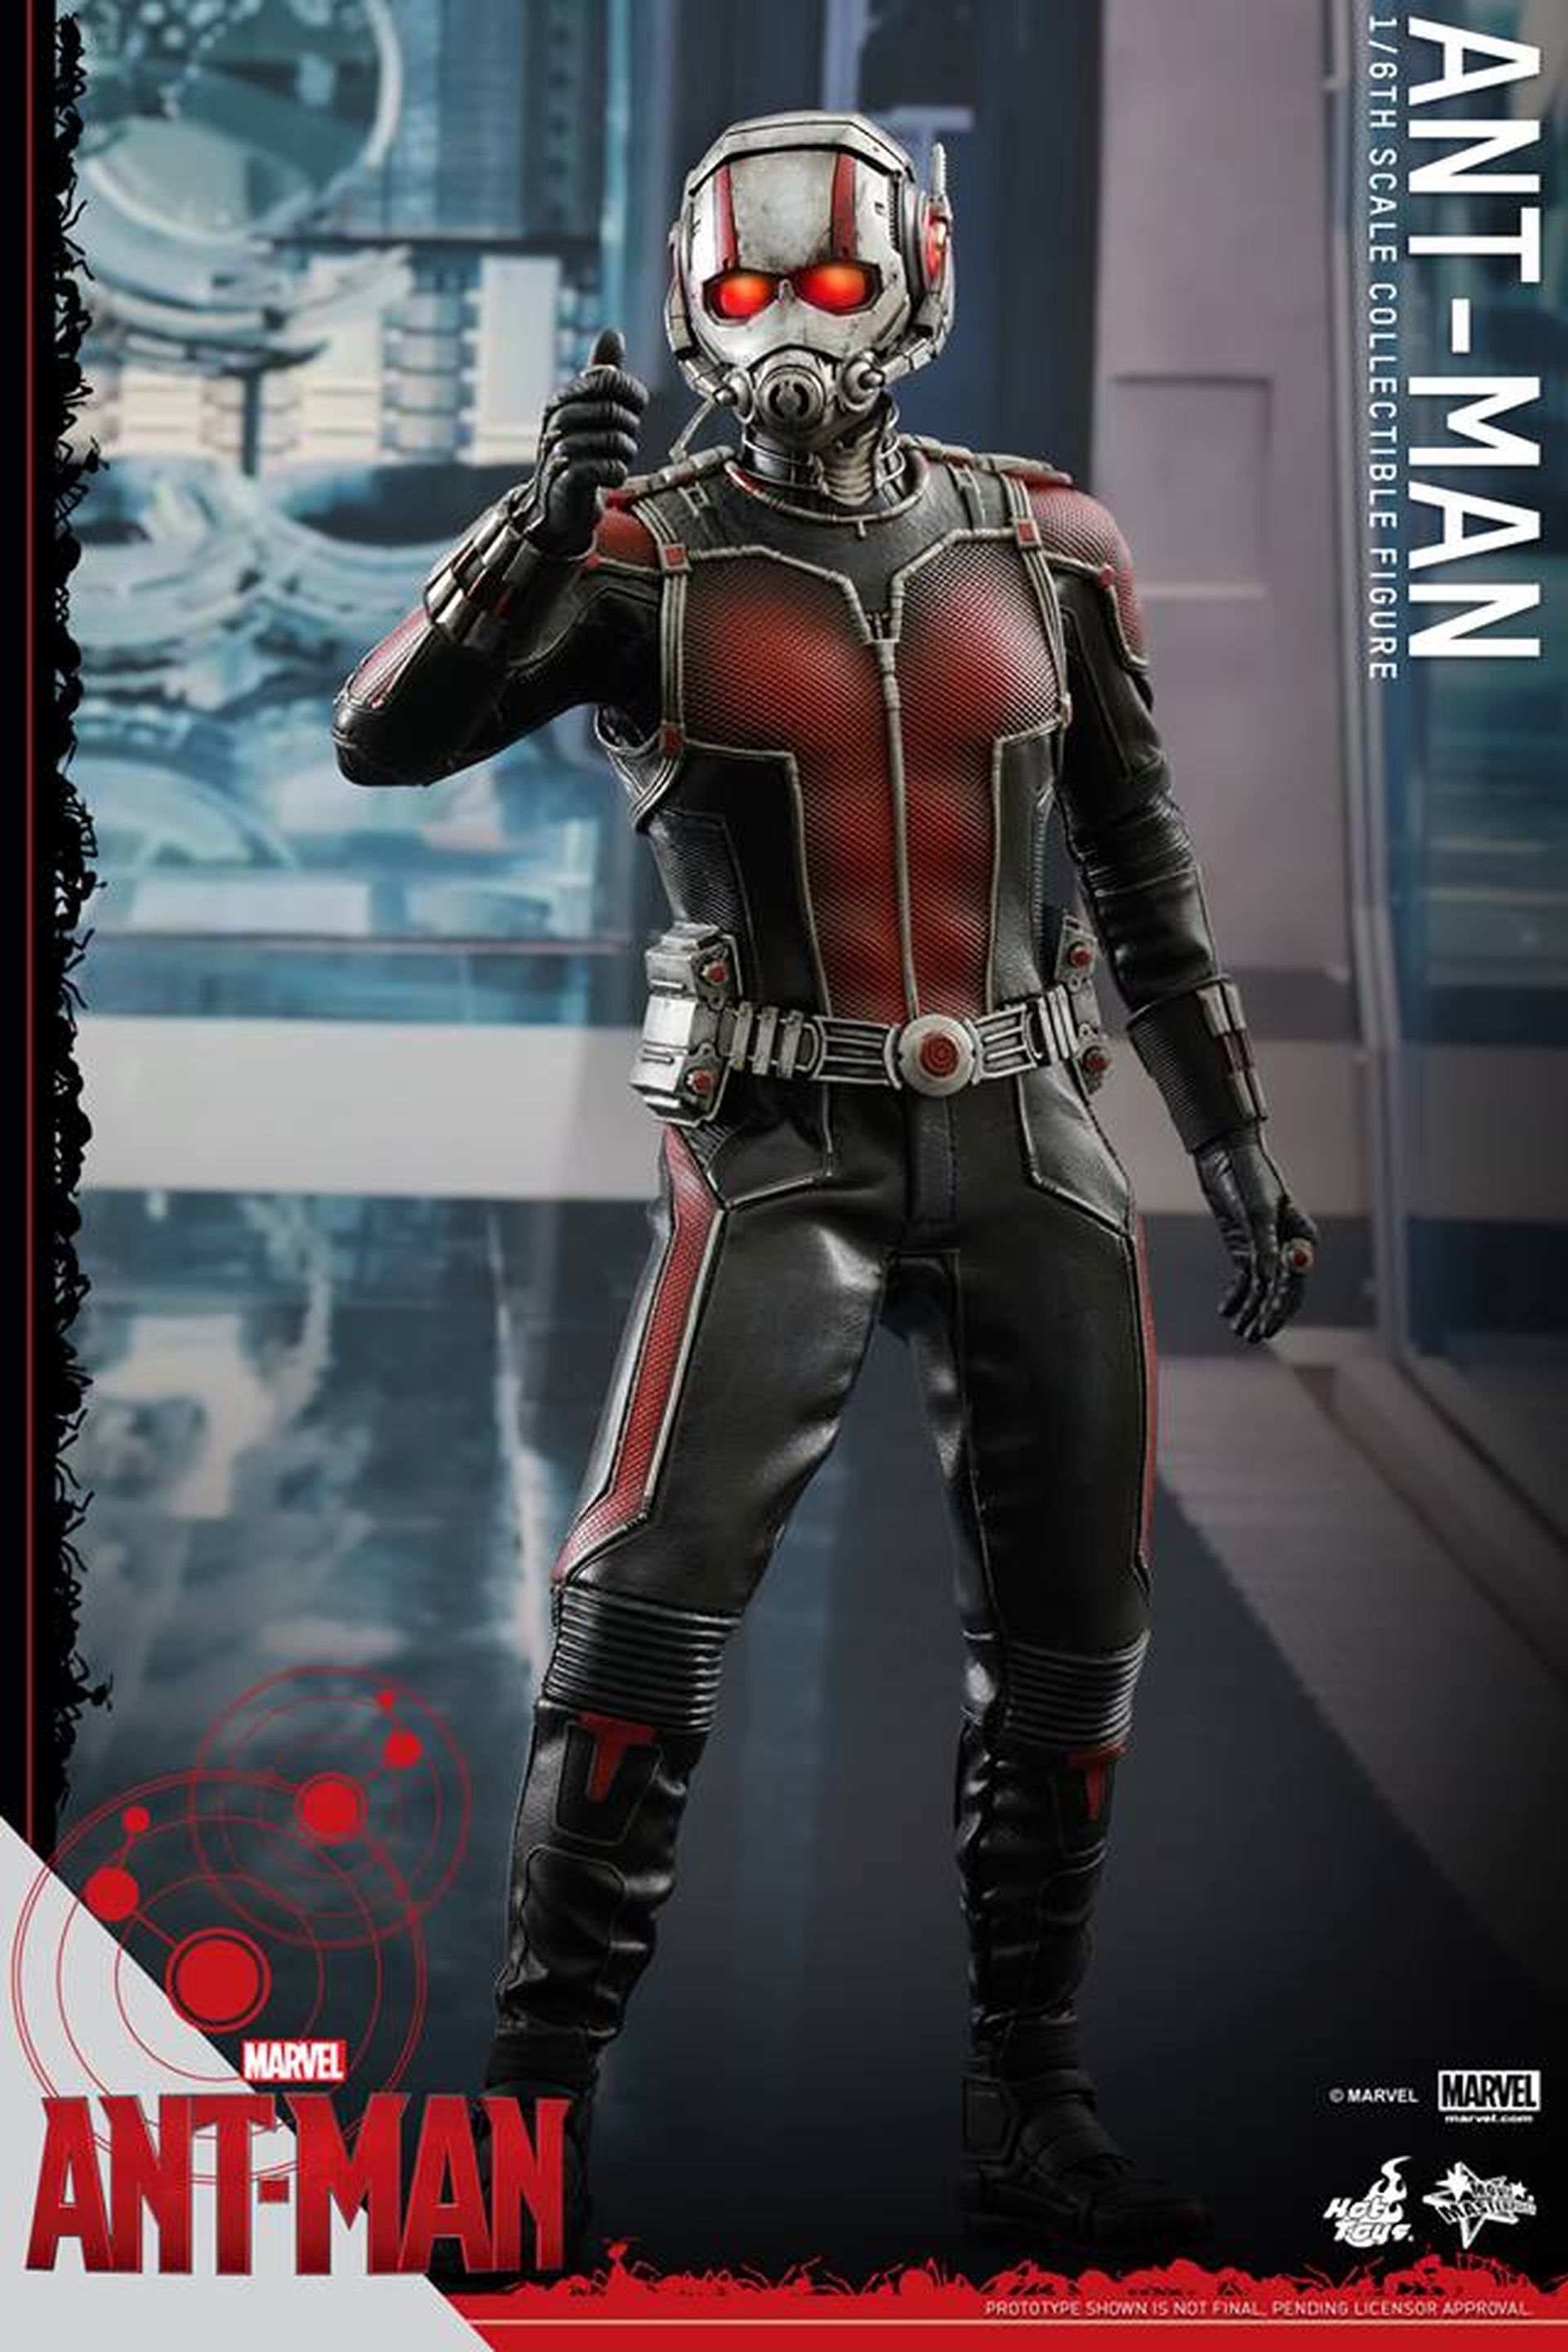 Ant-Man 1/6th scale Collectible Figure - Hot toys